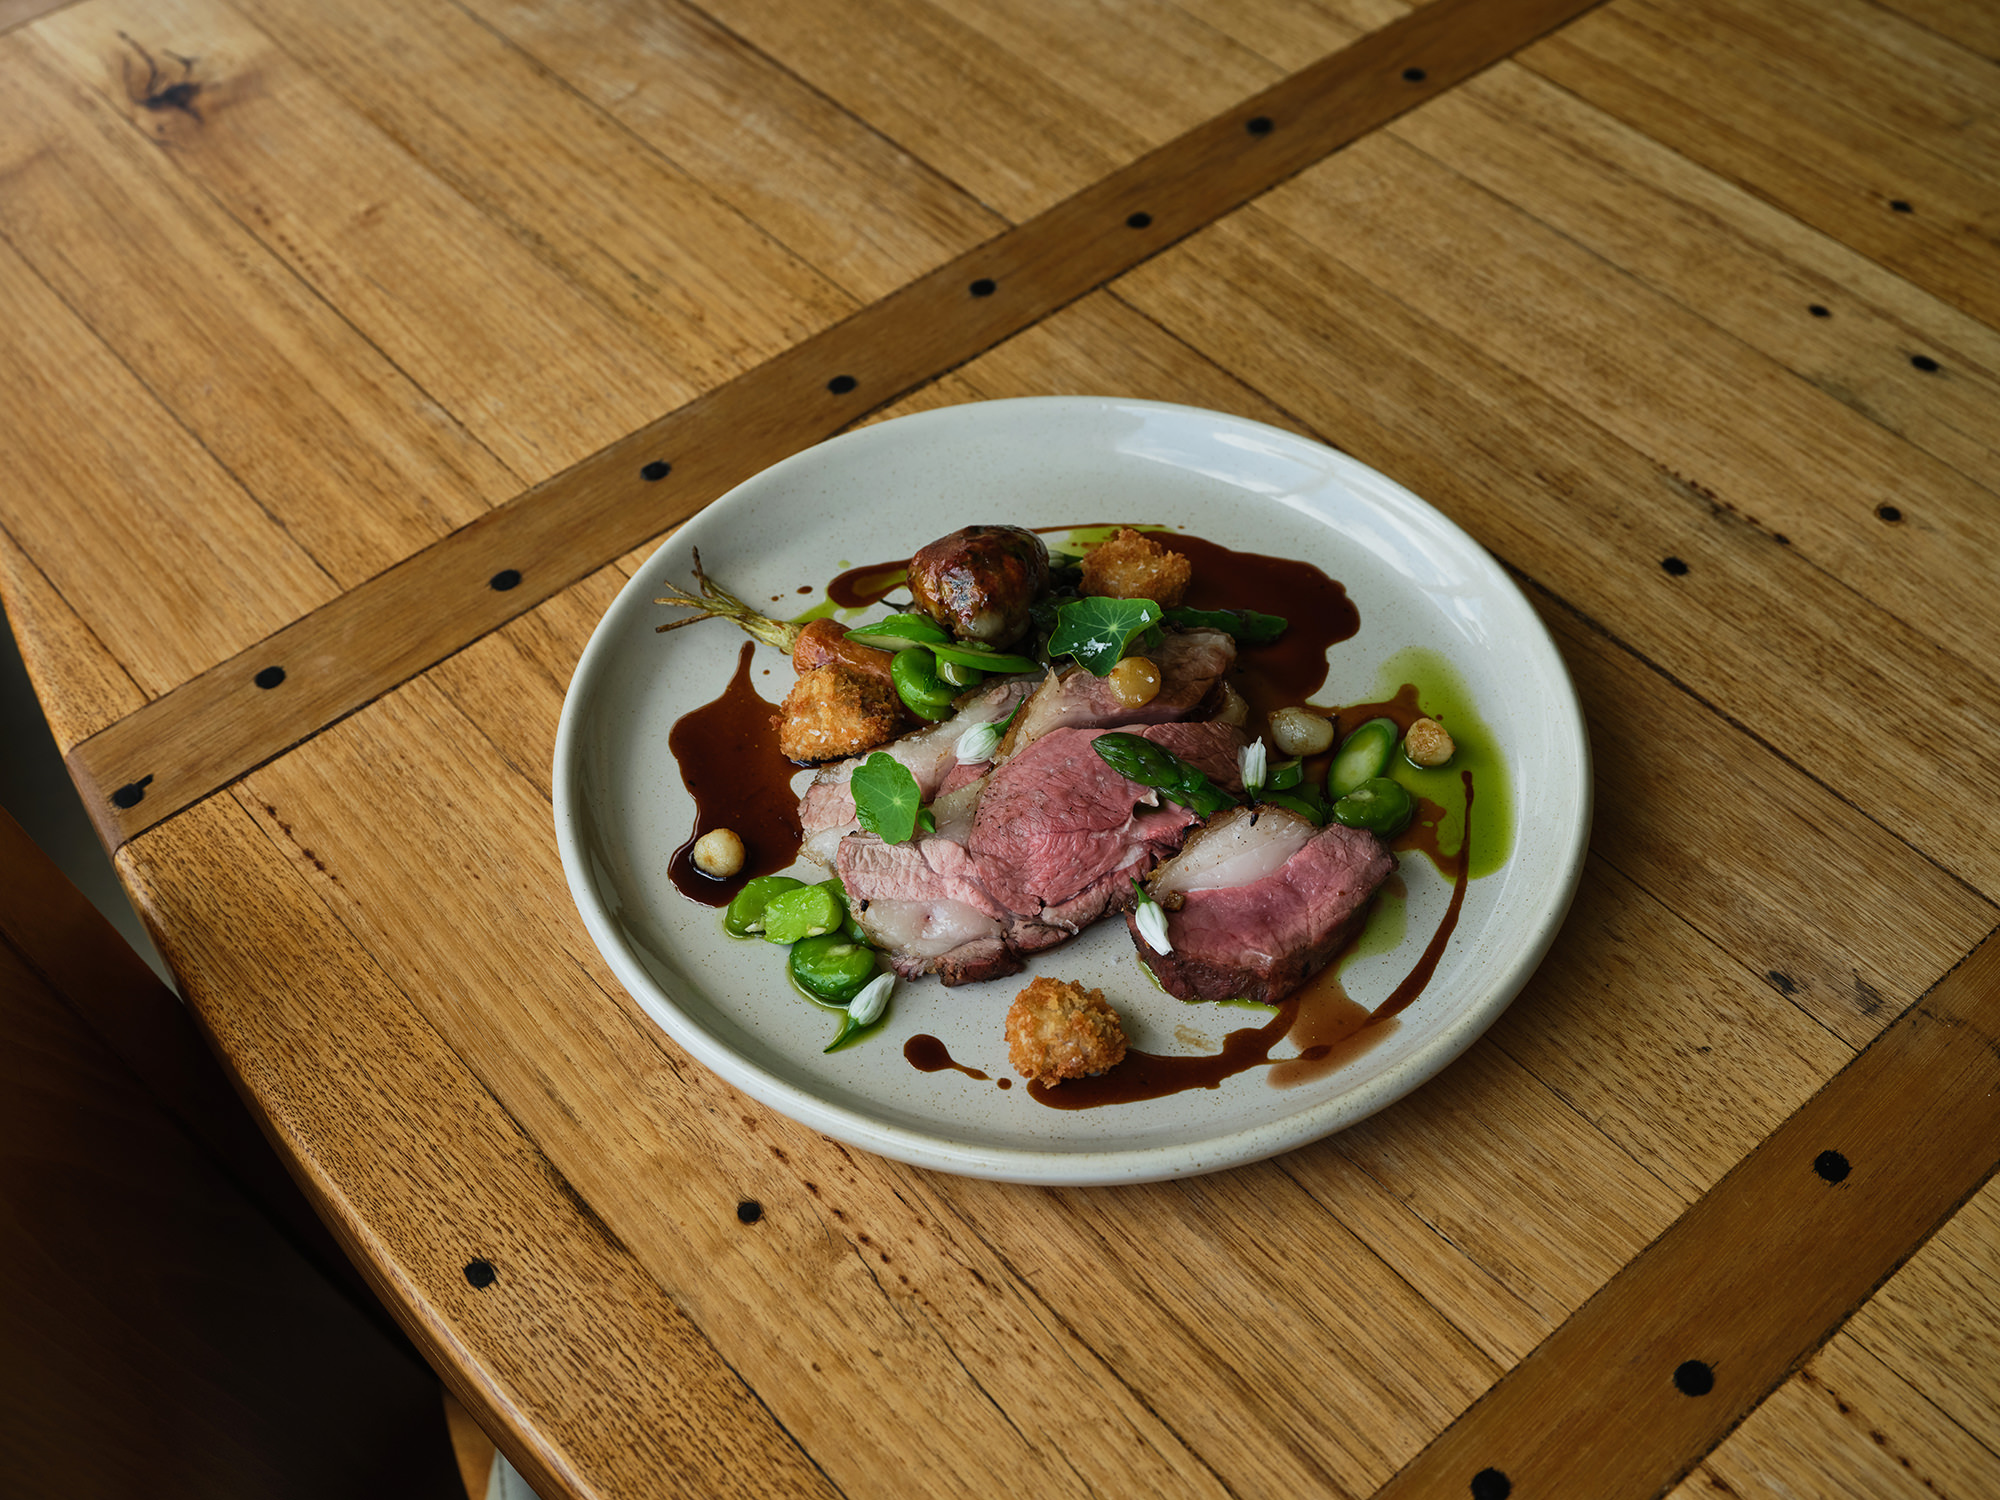 A ‘Gippsland Lamb’ dish featuring rump, backstrap, a lamb crepinette of leg, kidney and liver, and crumbed brain.